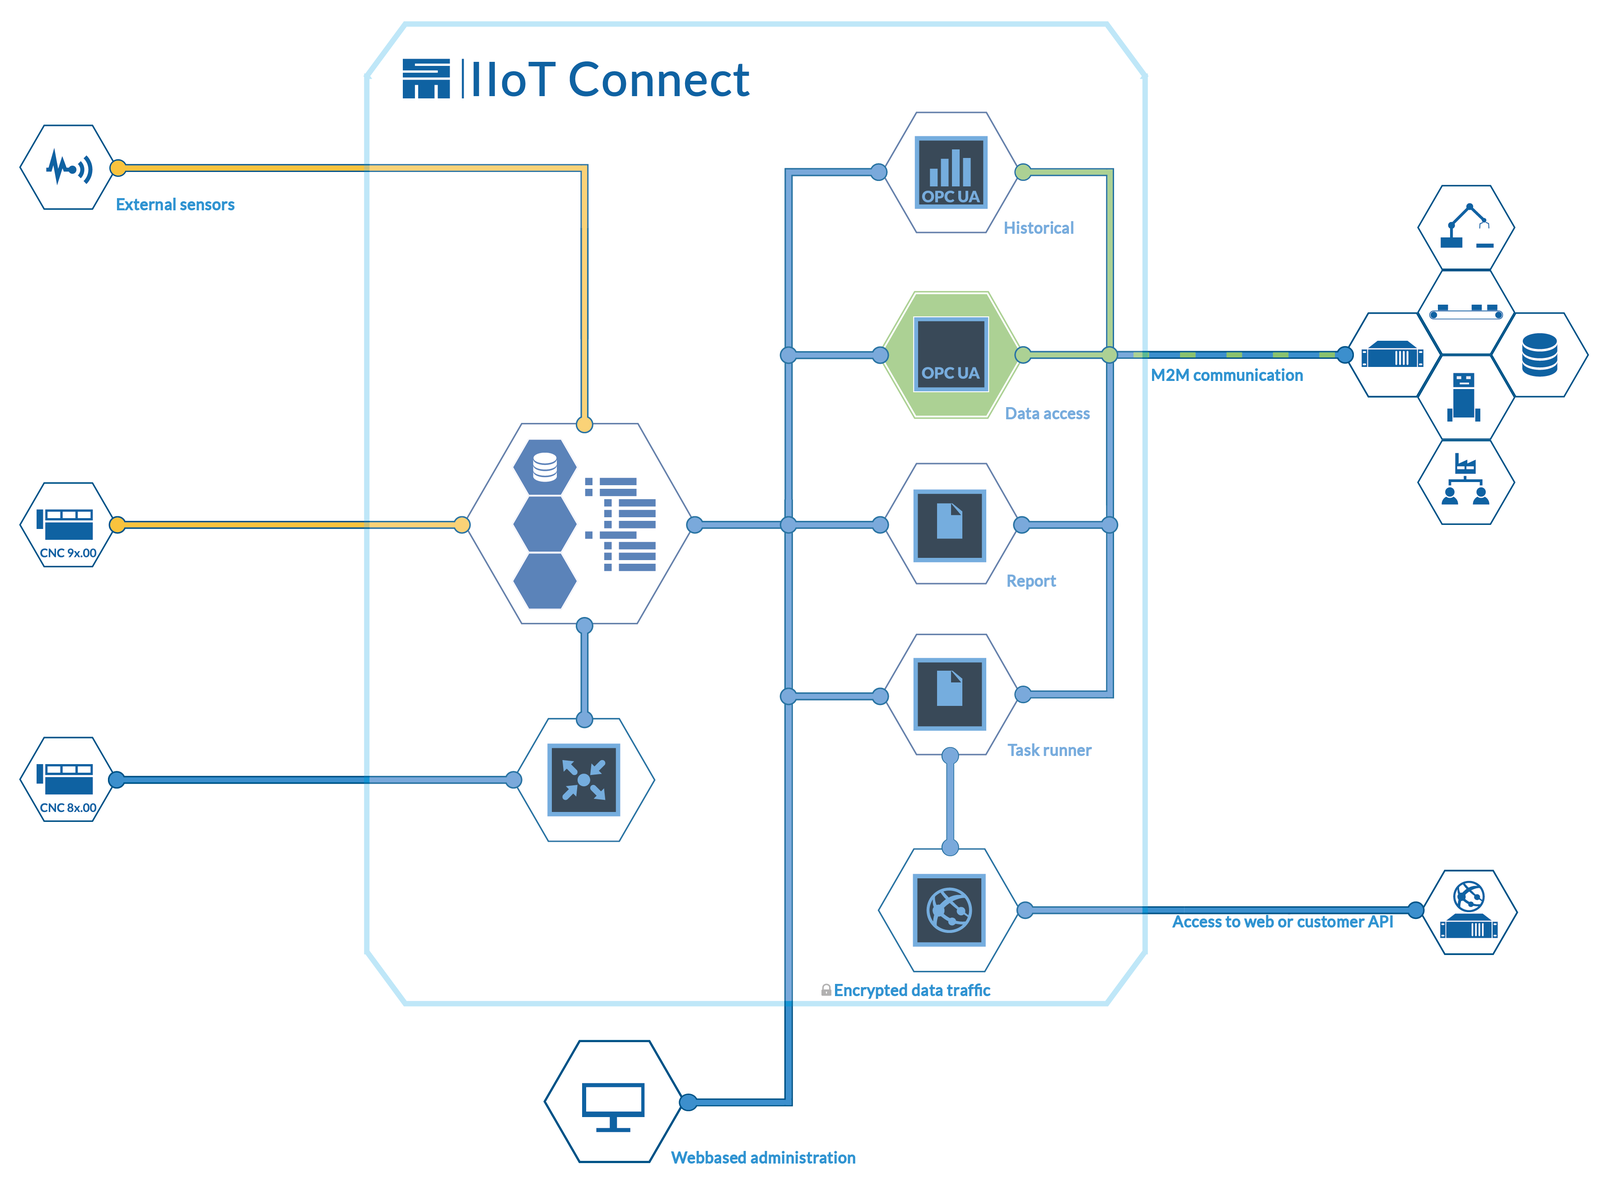 SM IIoT Connect